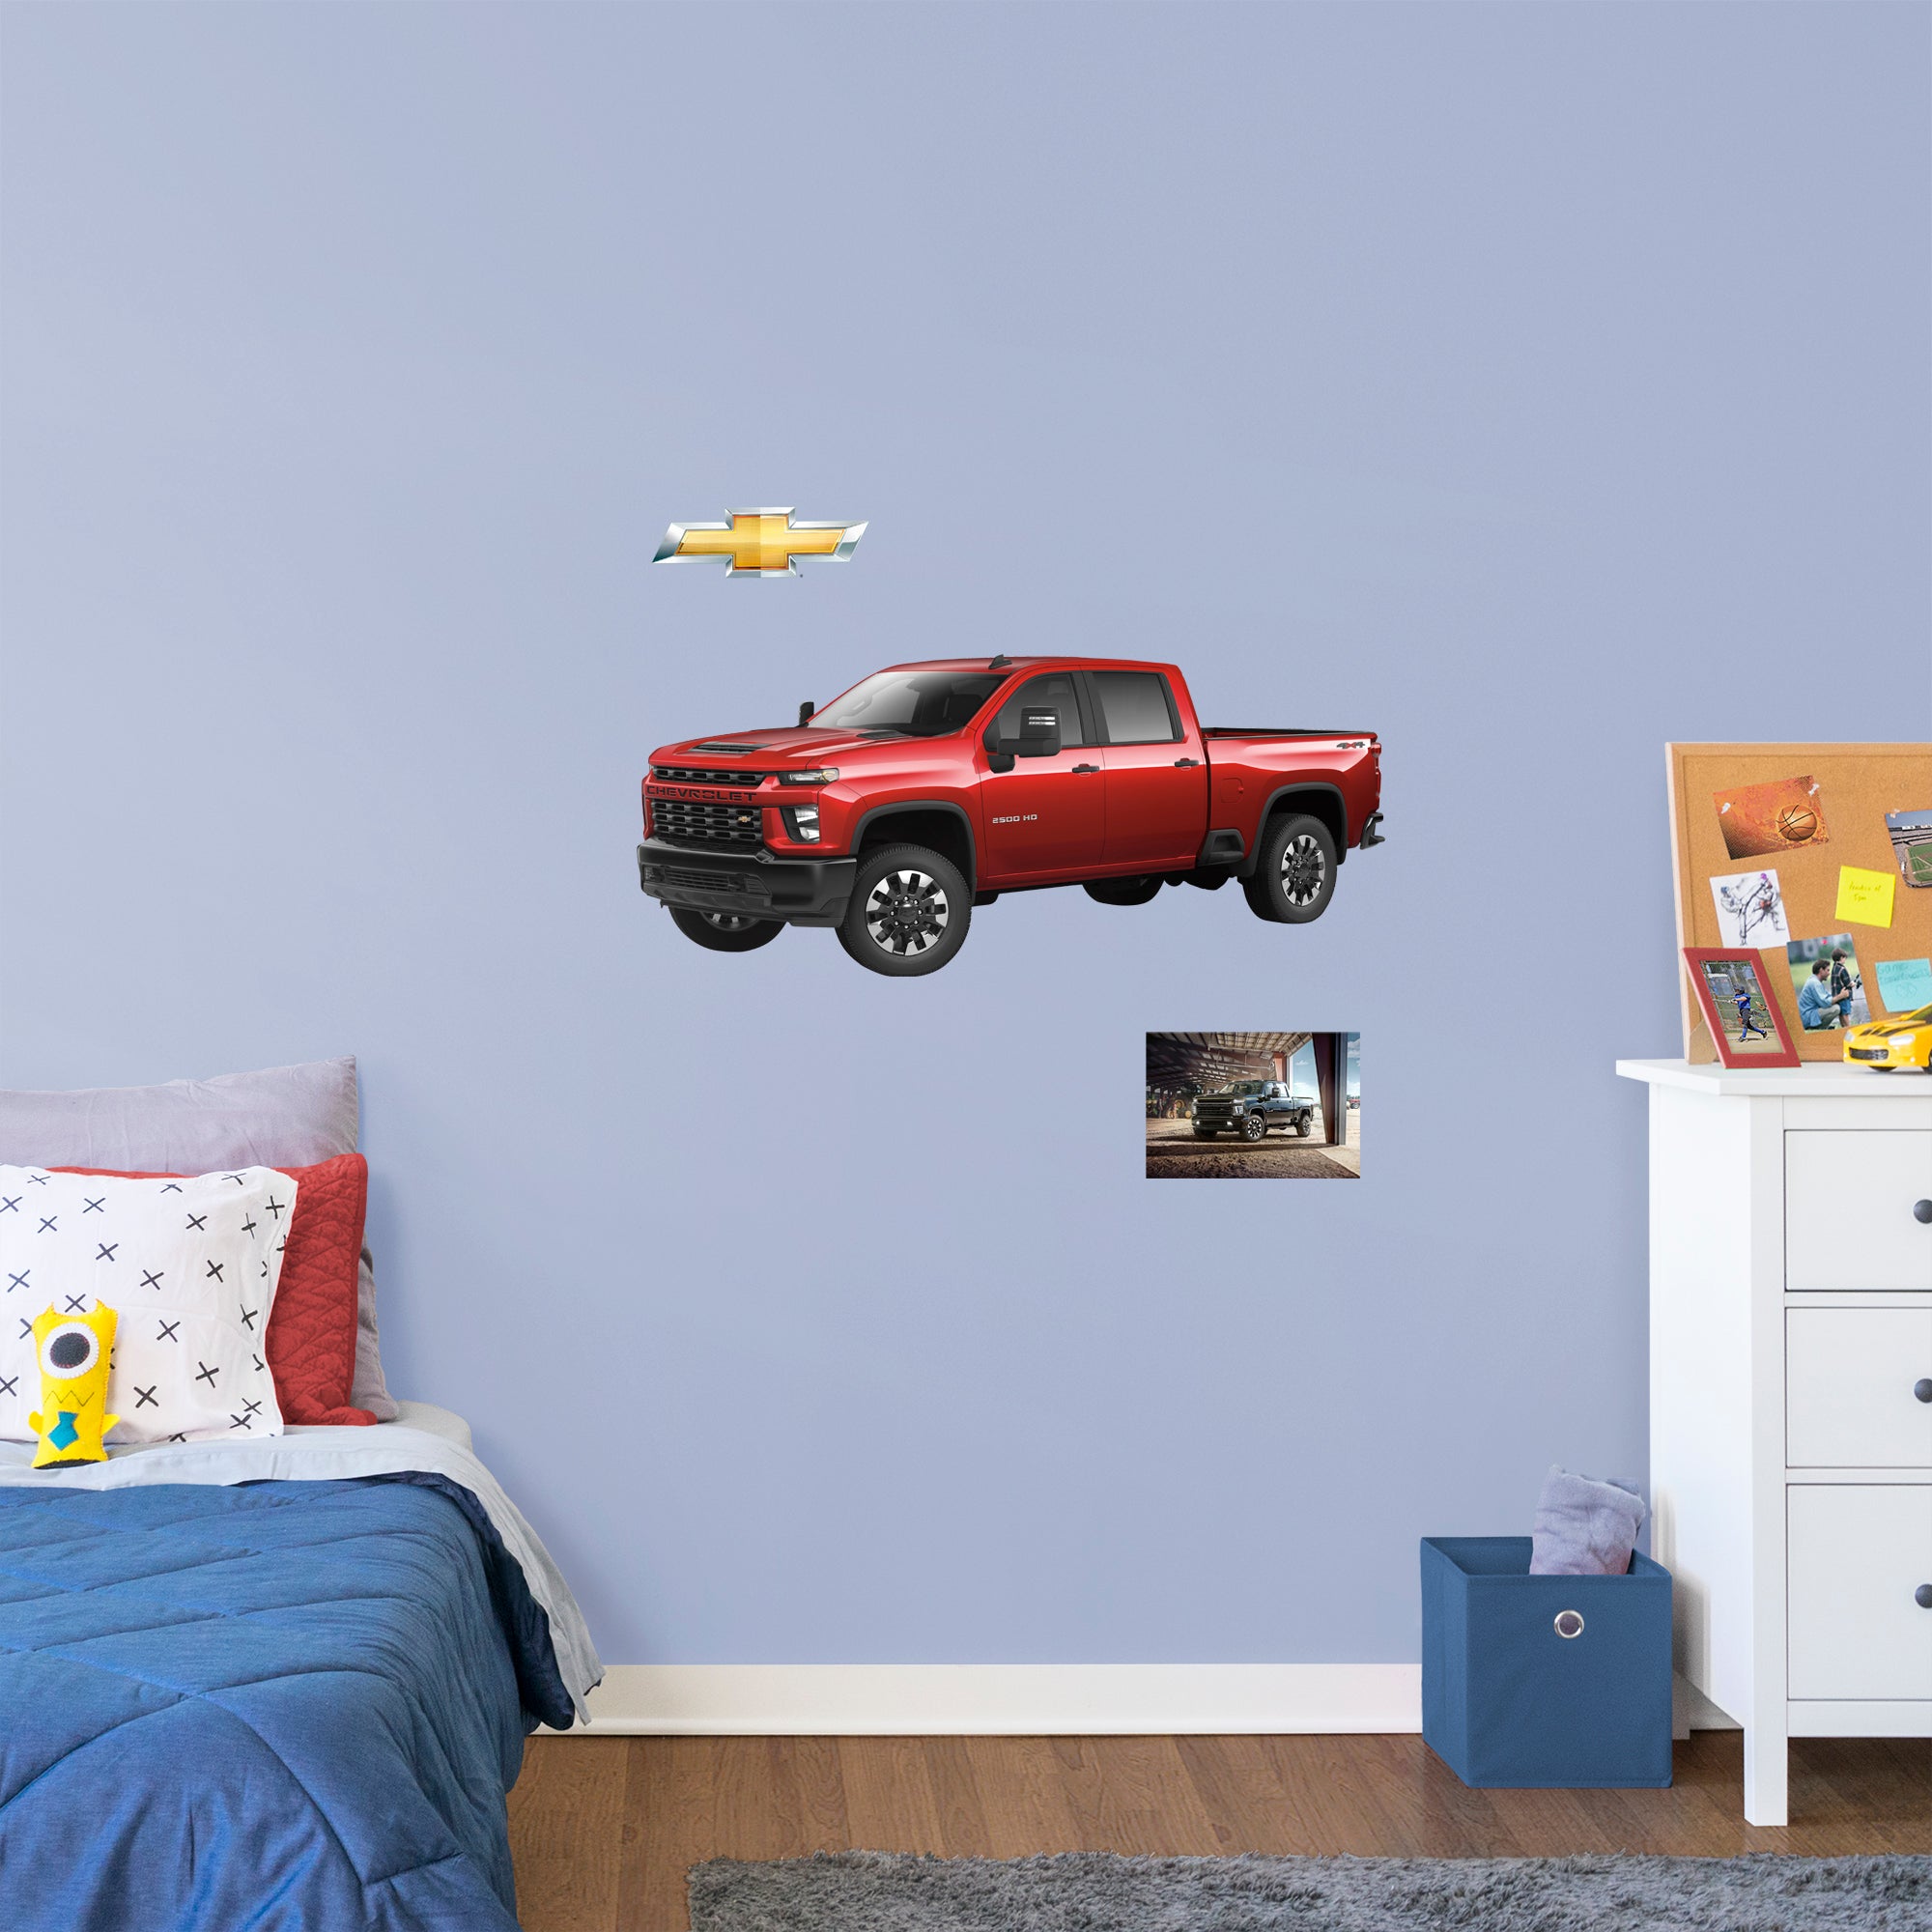 Chevrolet Red Silverado: Officially Licensed GM Removable Wall Decal Giant + 2 Decals by Fathead | Vinyl